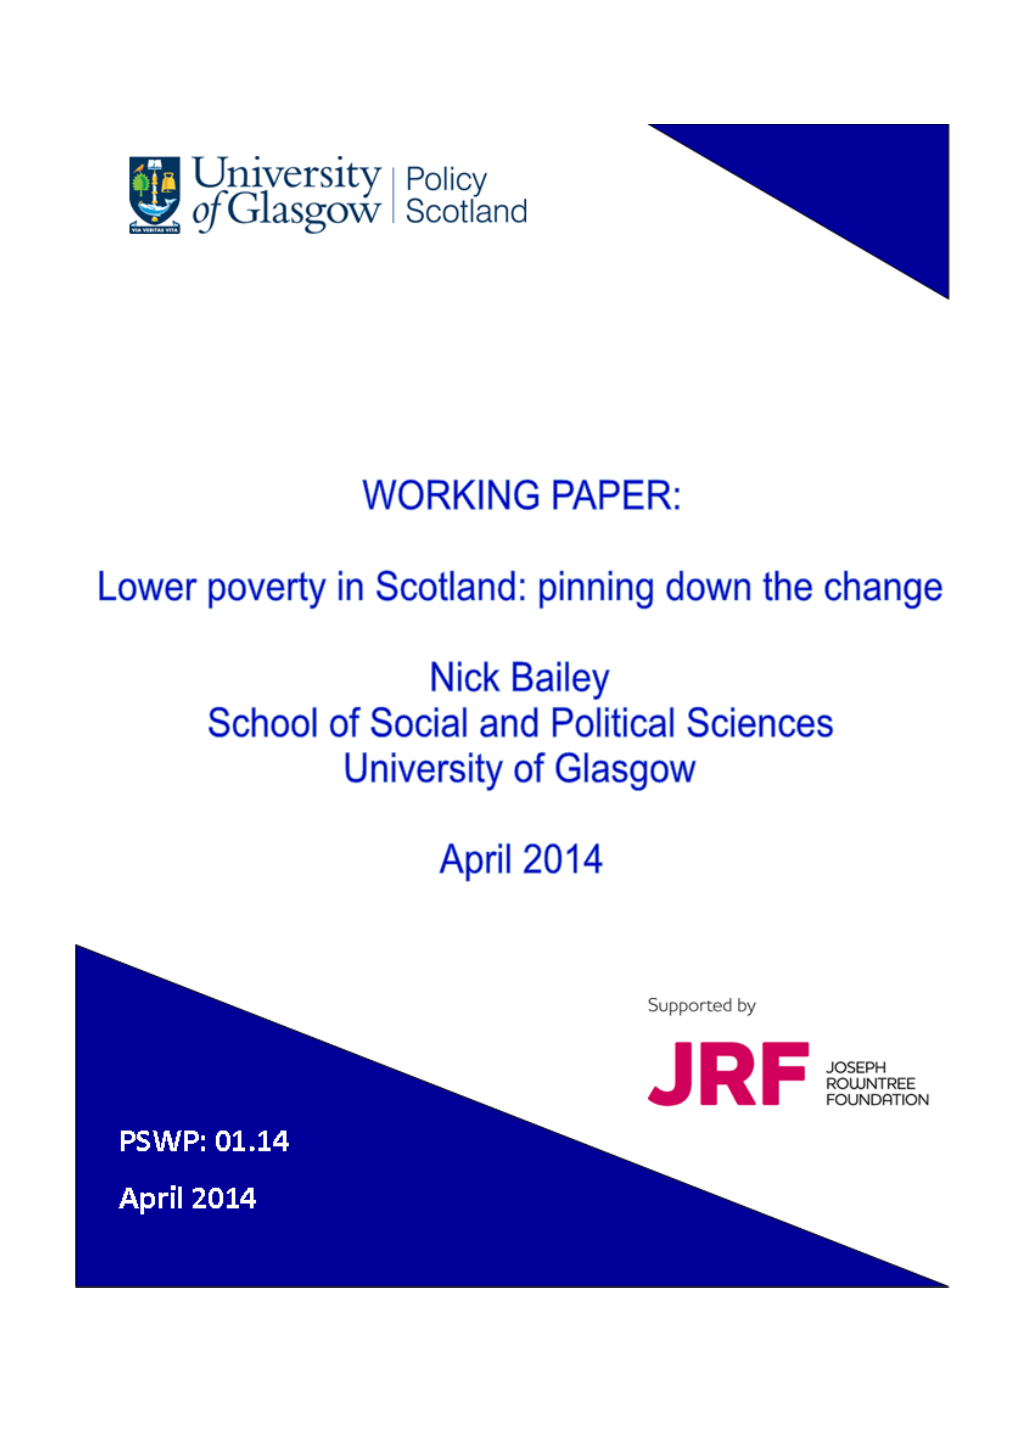 Lower Poverty in Scotland